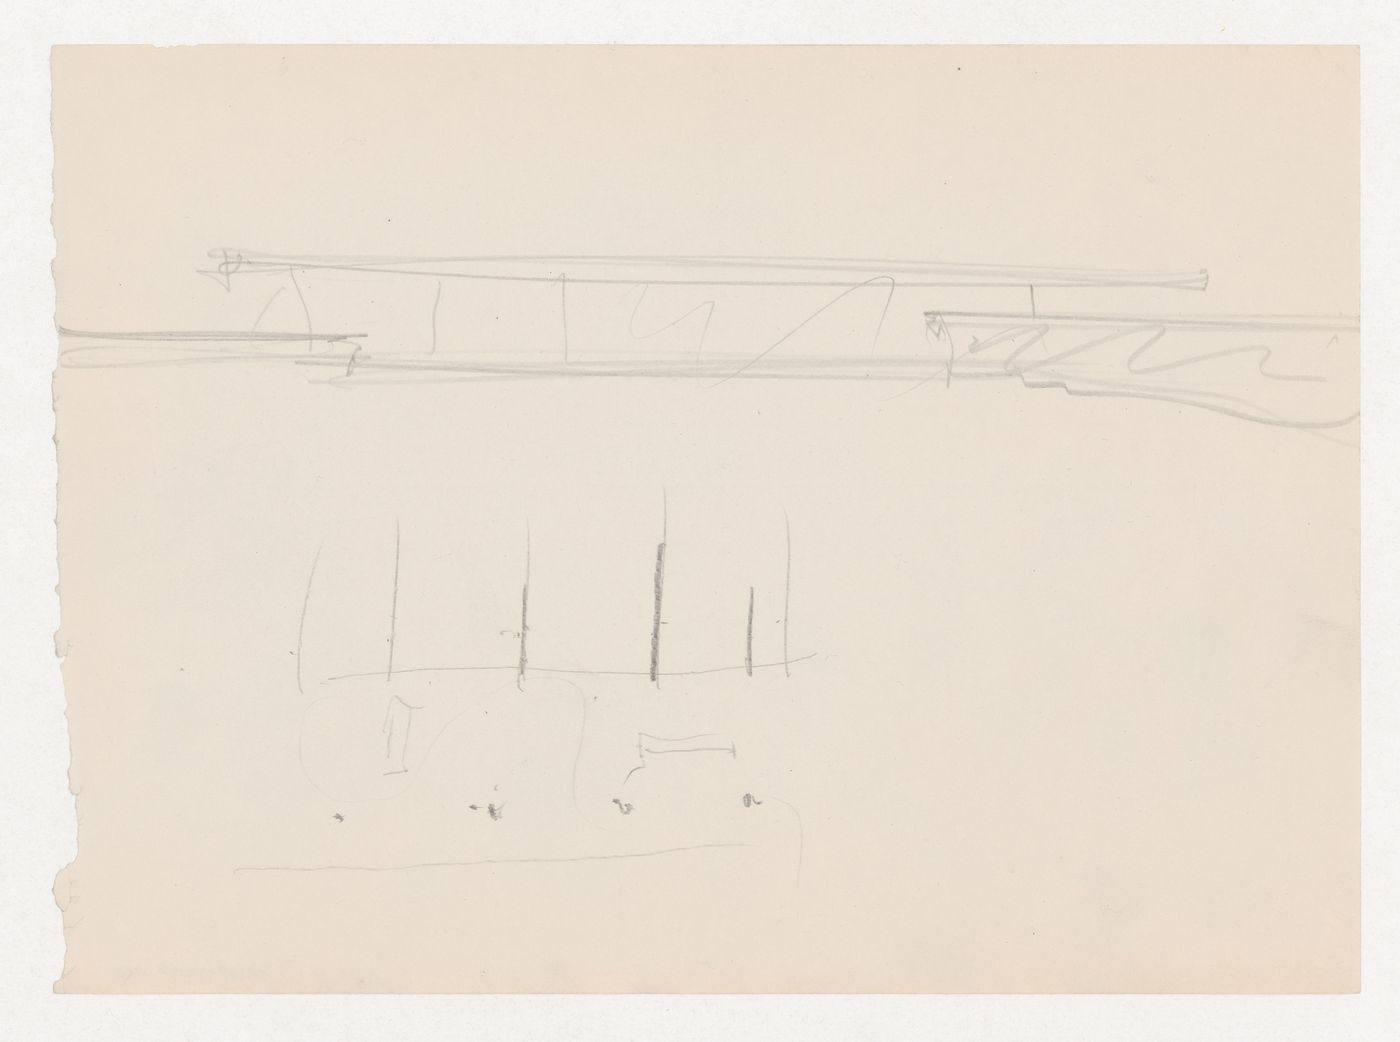 Sketch for the principal elevation and sketch, possibly a plan, for Museum for a Small City